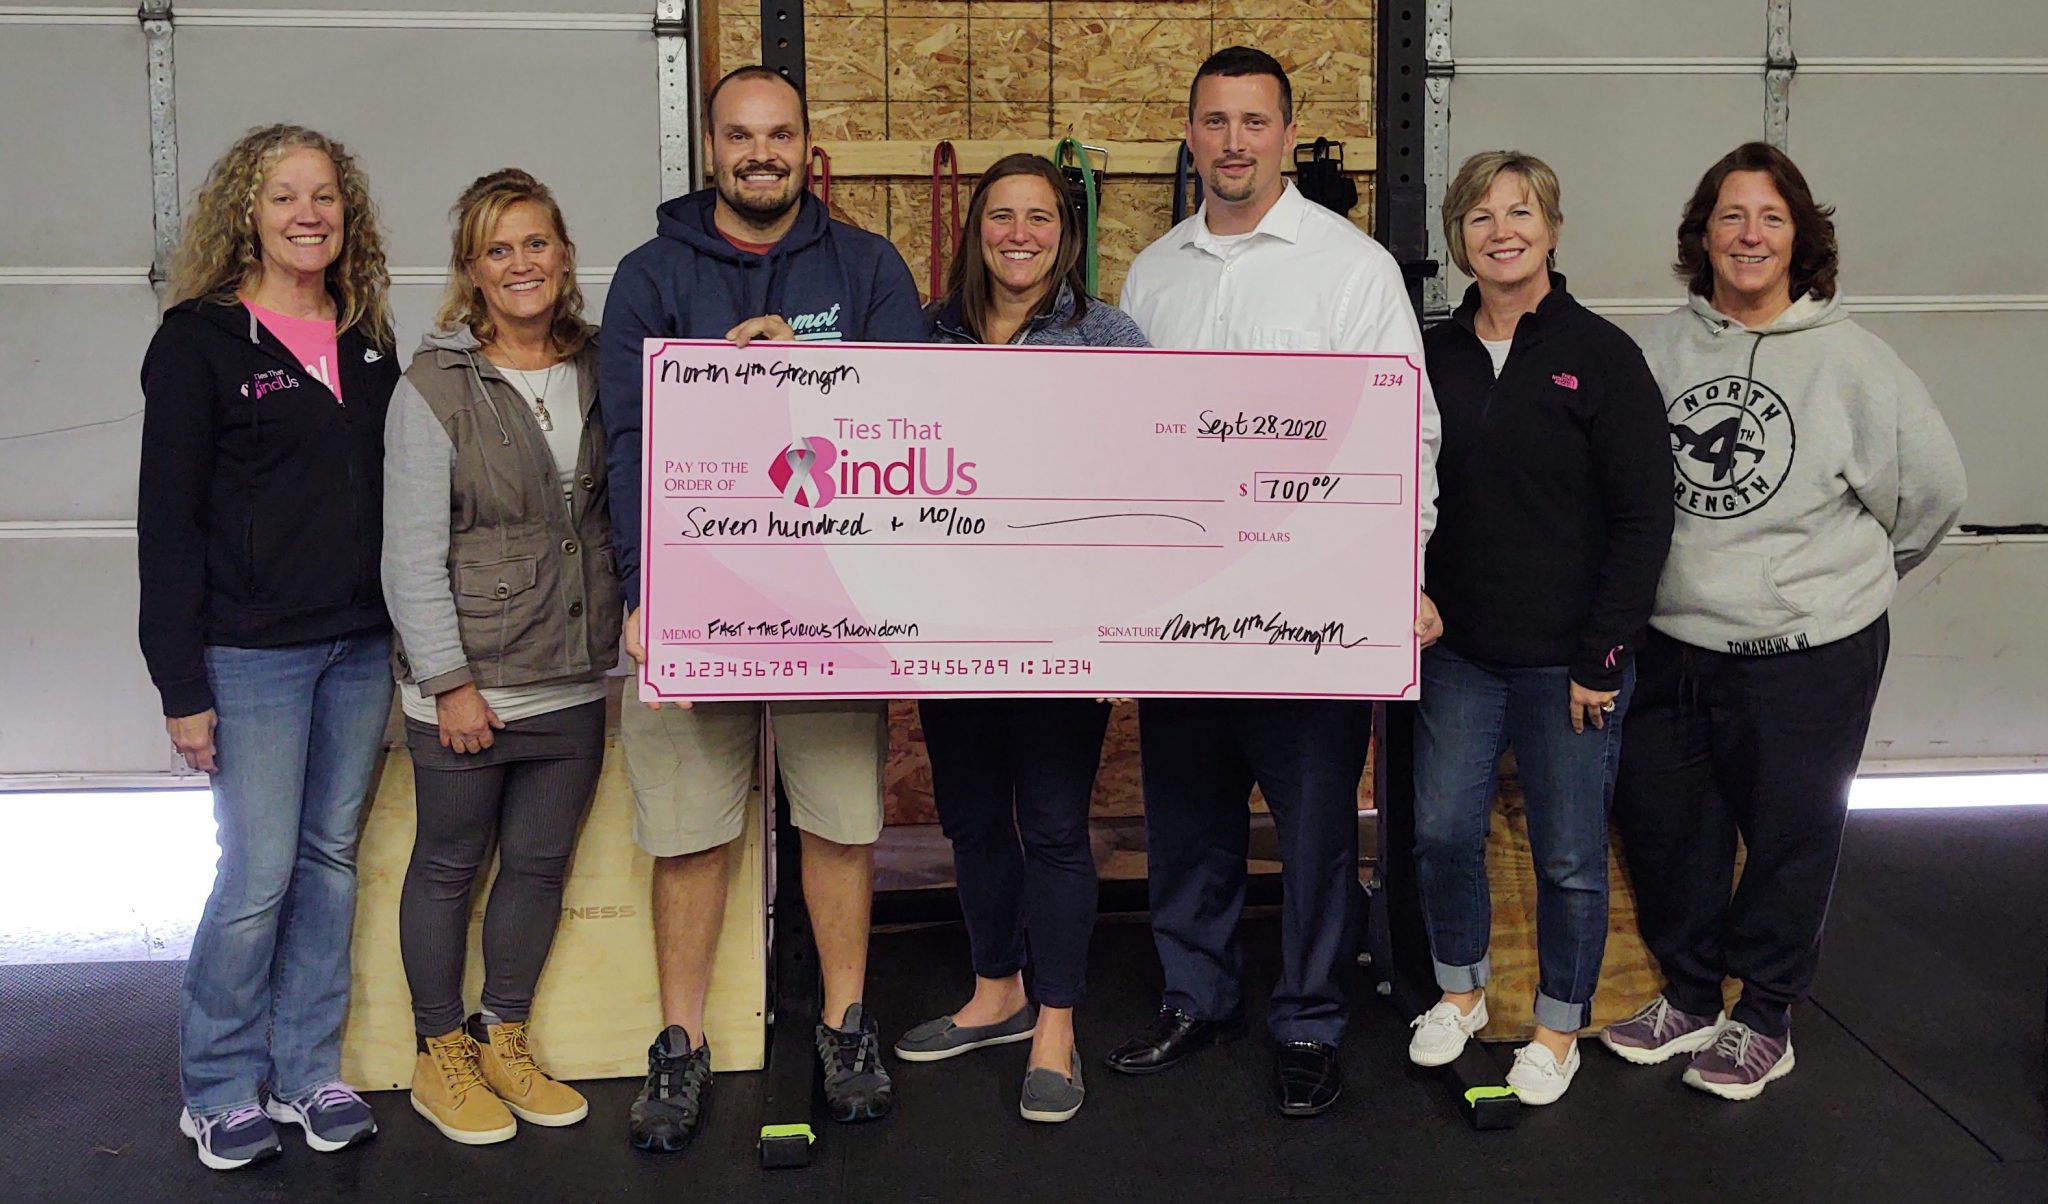 North 4th Strength holds fundraising competition